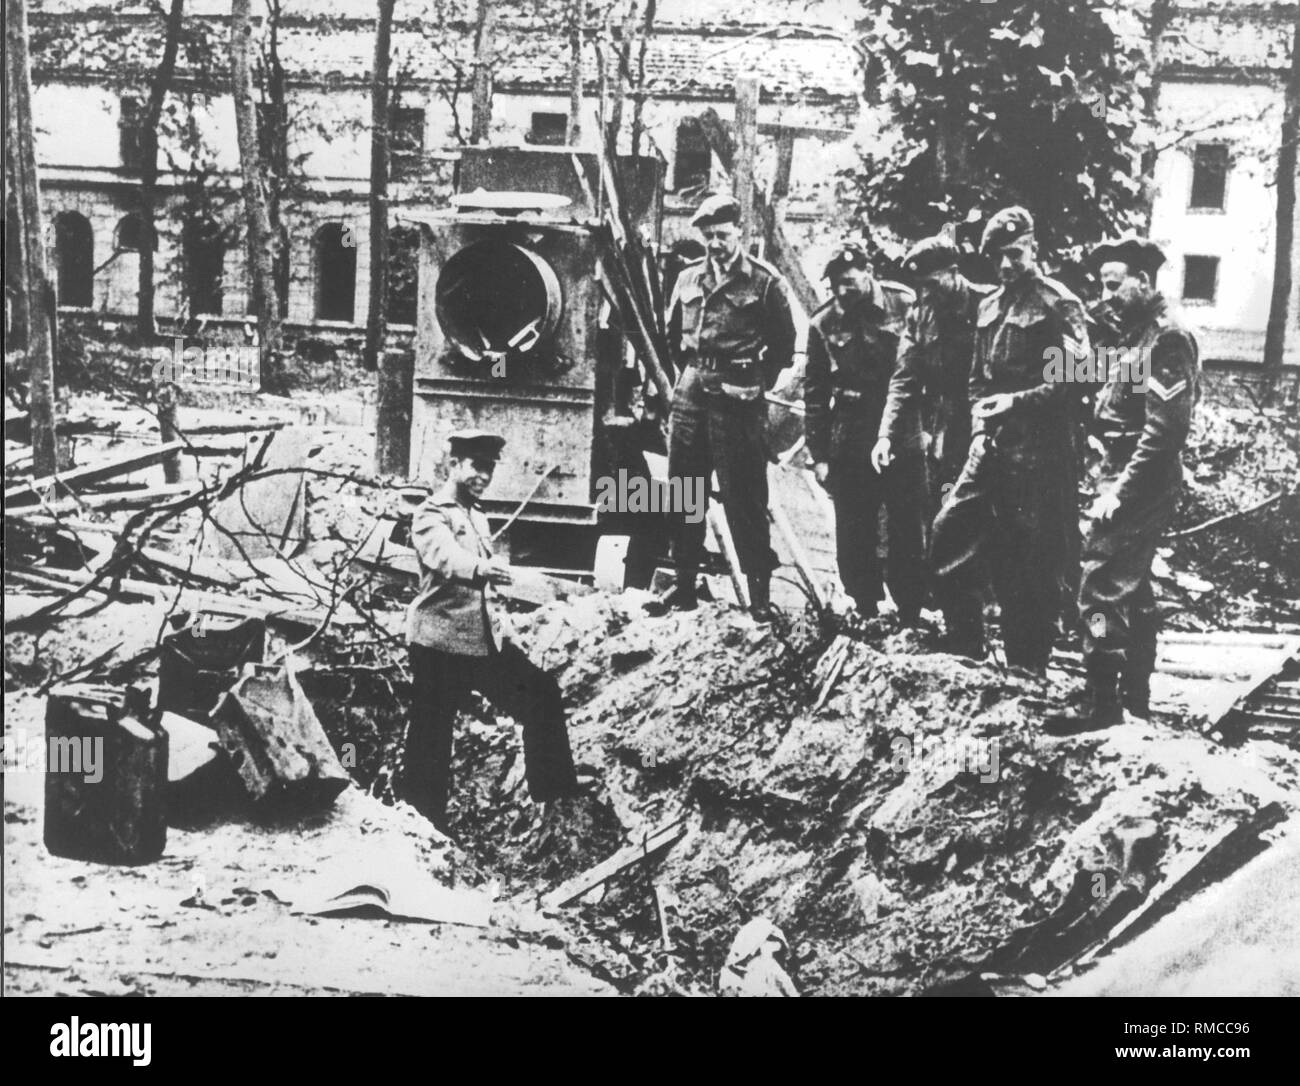 A soldier of the Red Army shows British soldiers the place, where the bodies of Eva Braun and Adolf Hitler were probably burned after their suicide in the garden of the Reich Chancellery. Stock Photo